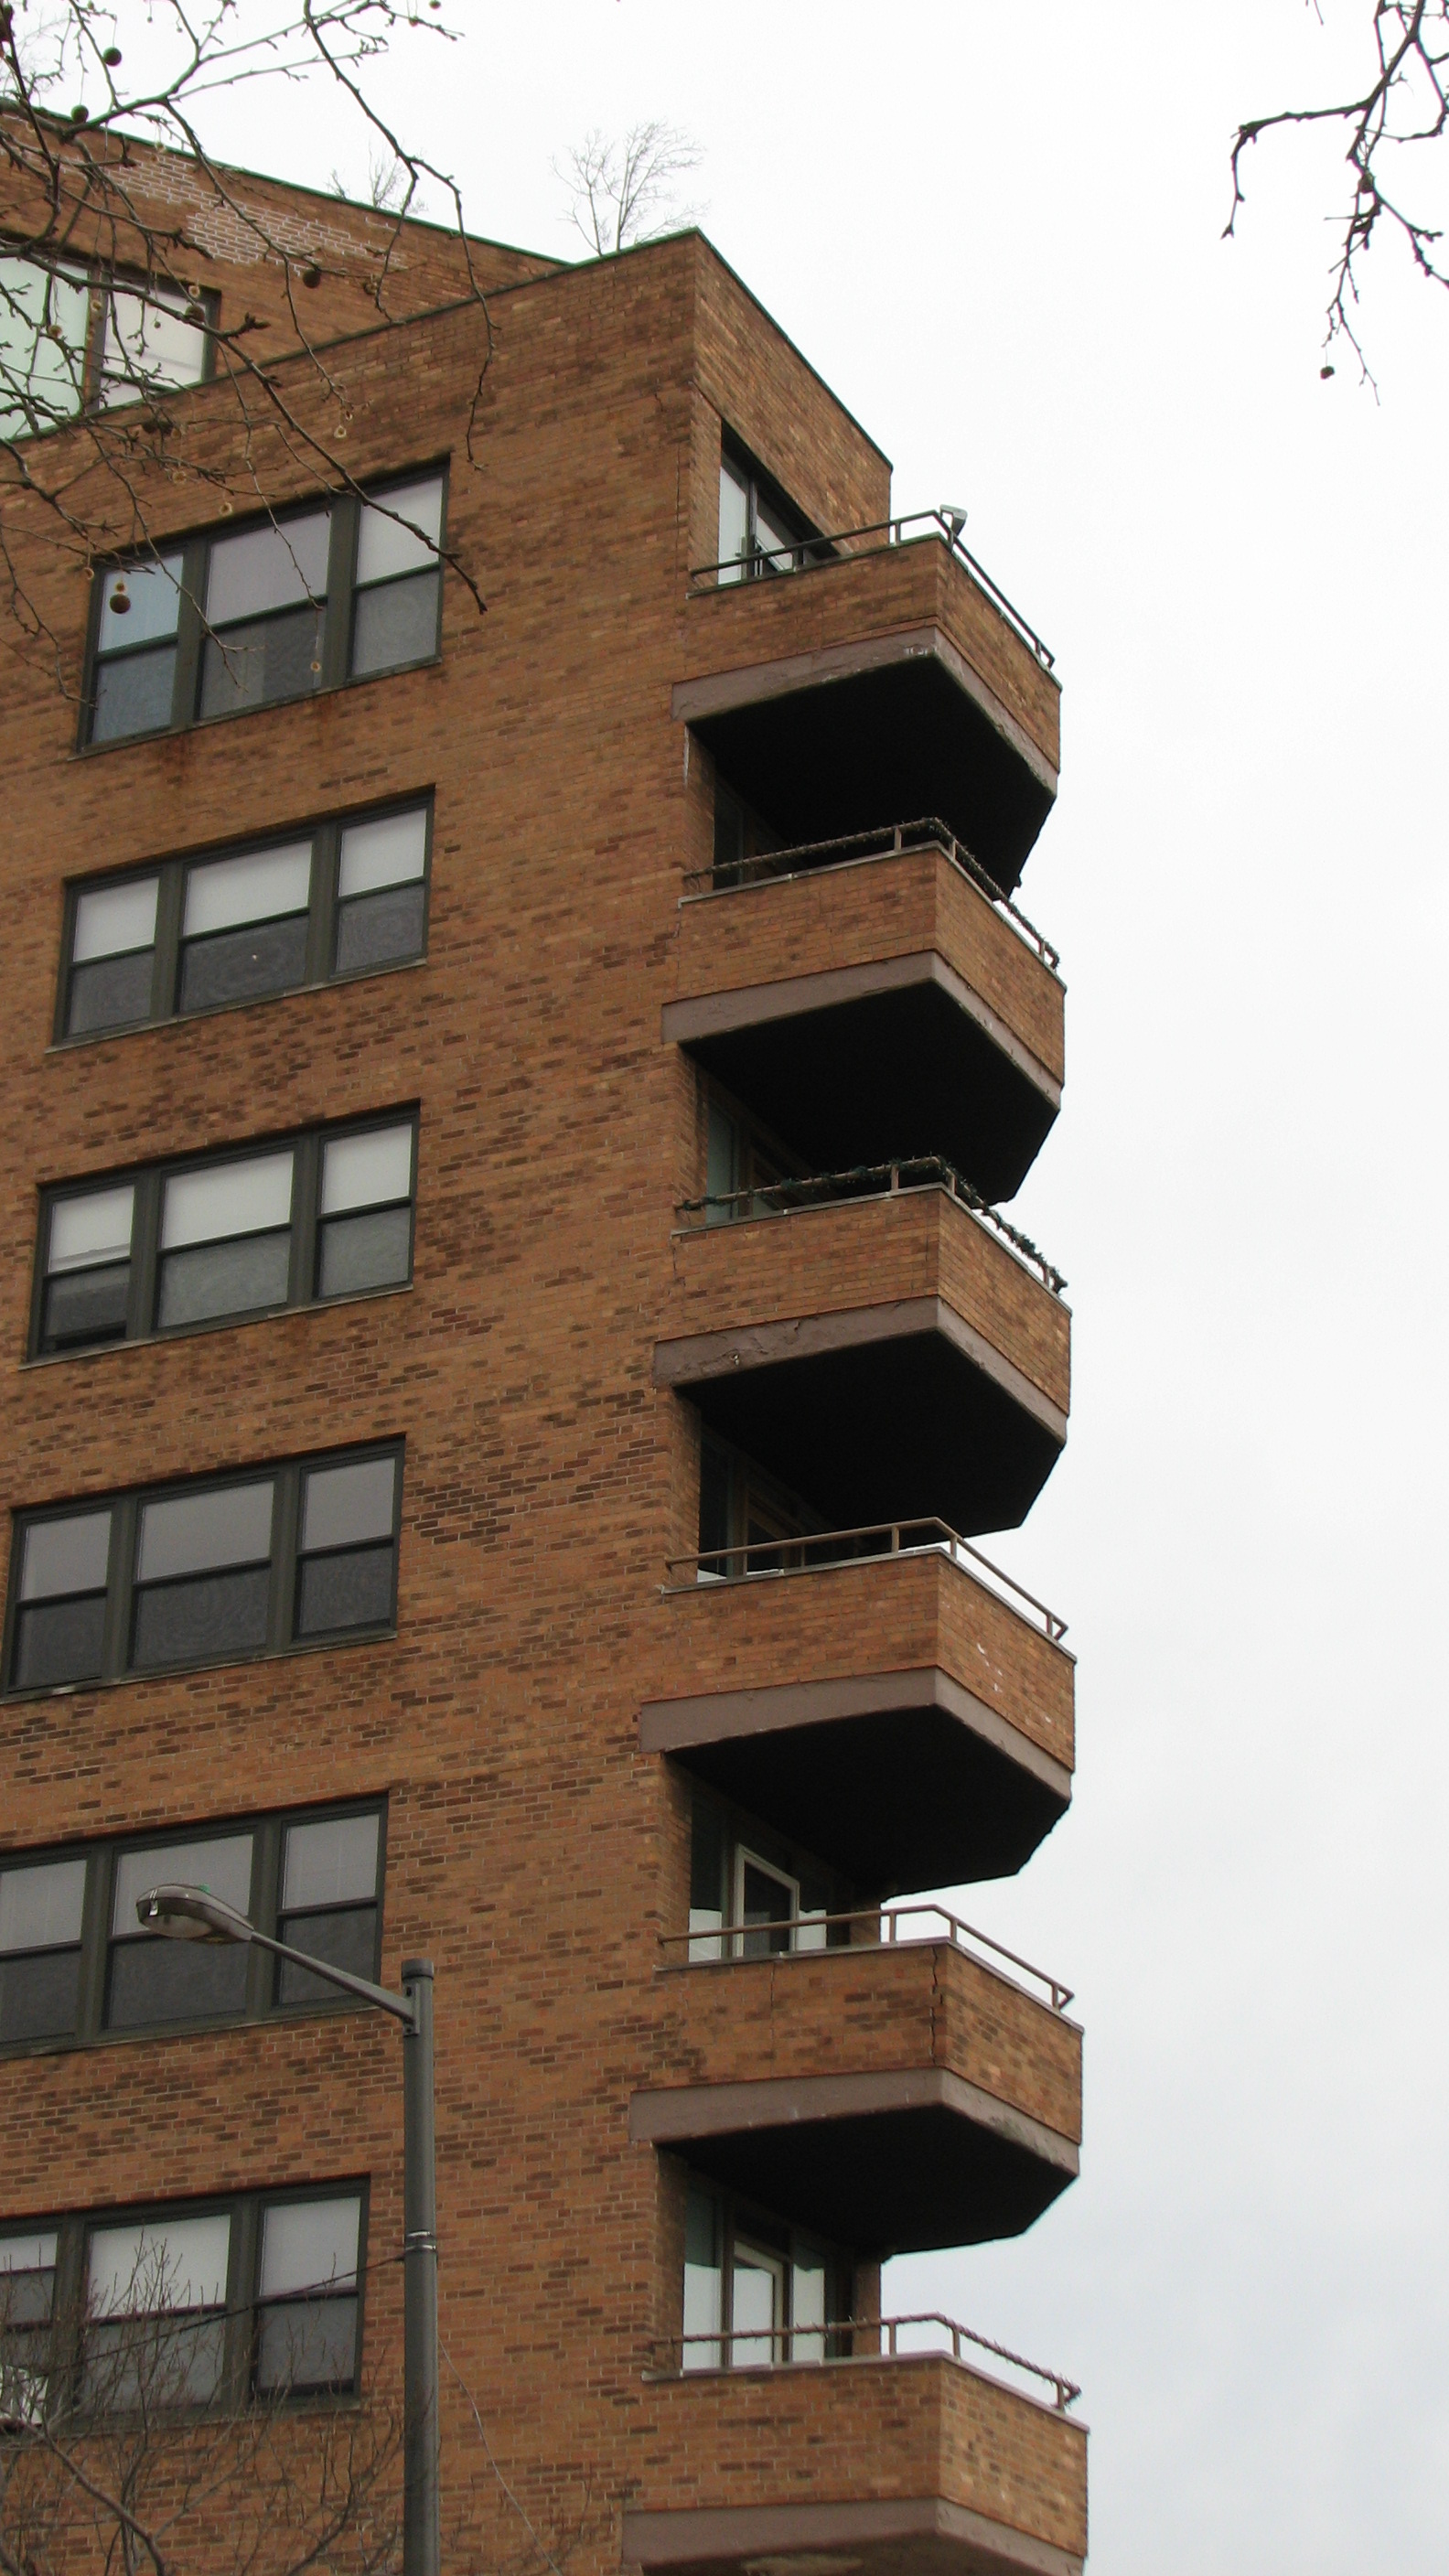 Brick balconies provide a strong profile of the Parkway House.